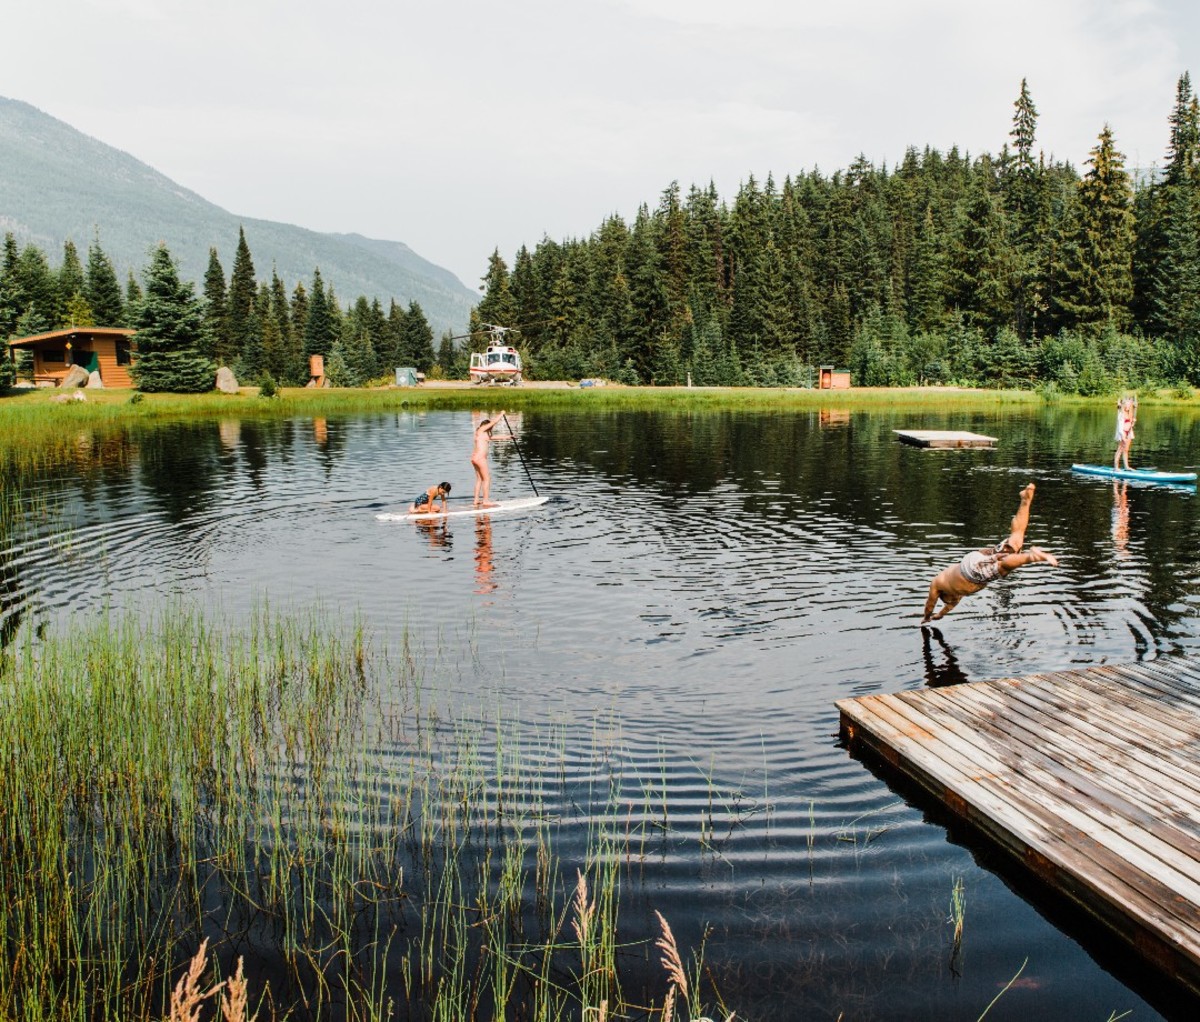 Guests recreate on a lake at one of CMH's summer lodges, paddleboarding and diving into the water.